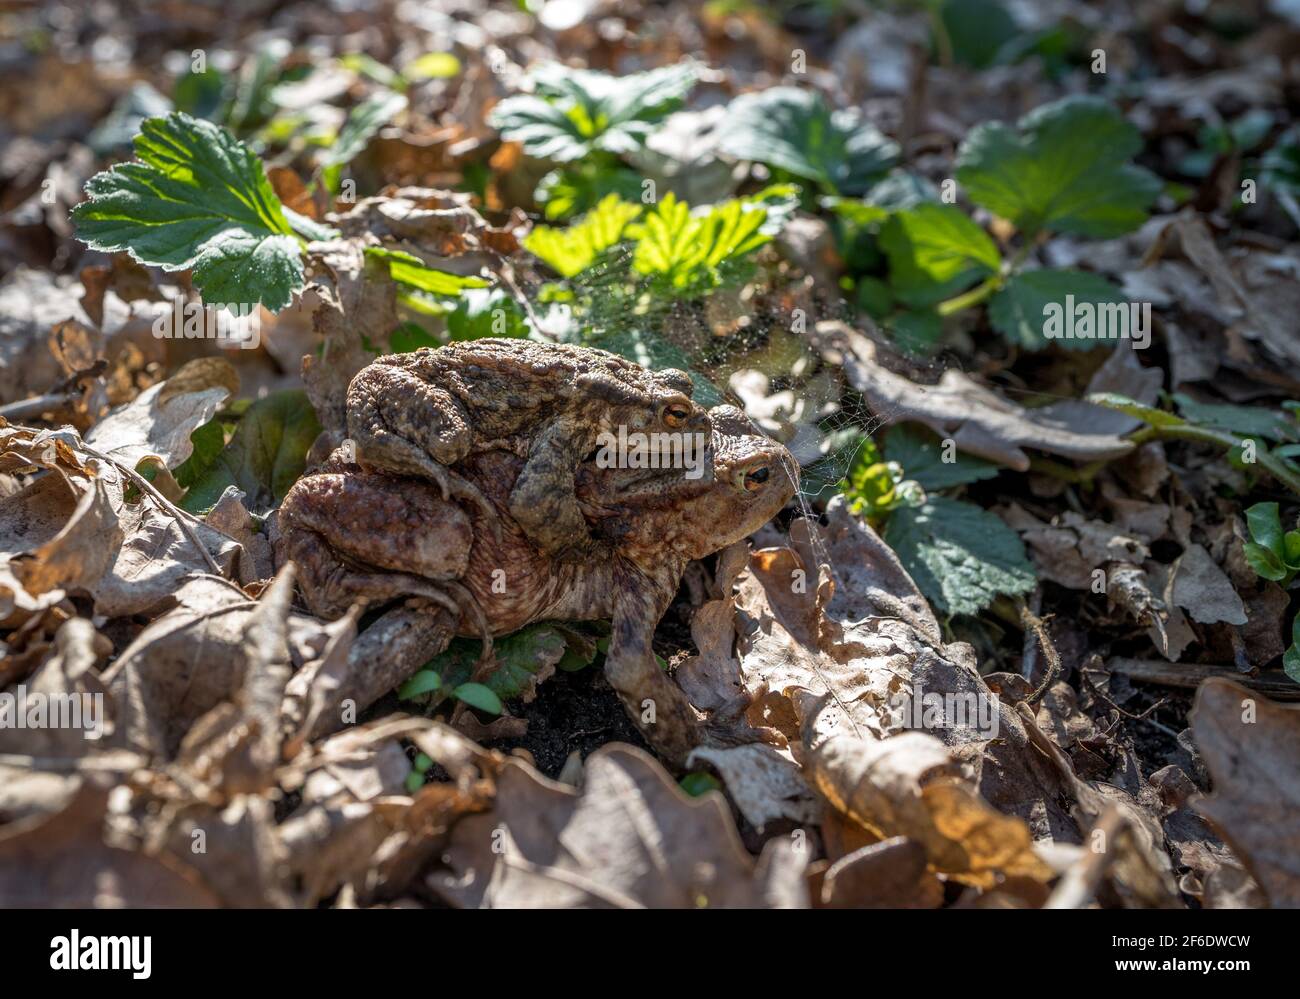 Male toad riding on the back of a female toad during the breeding season. Stock Photo